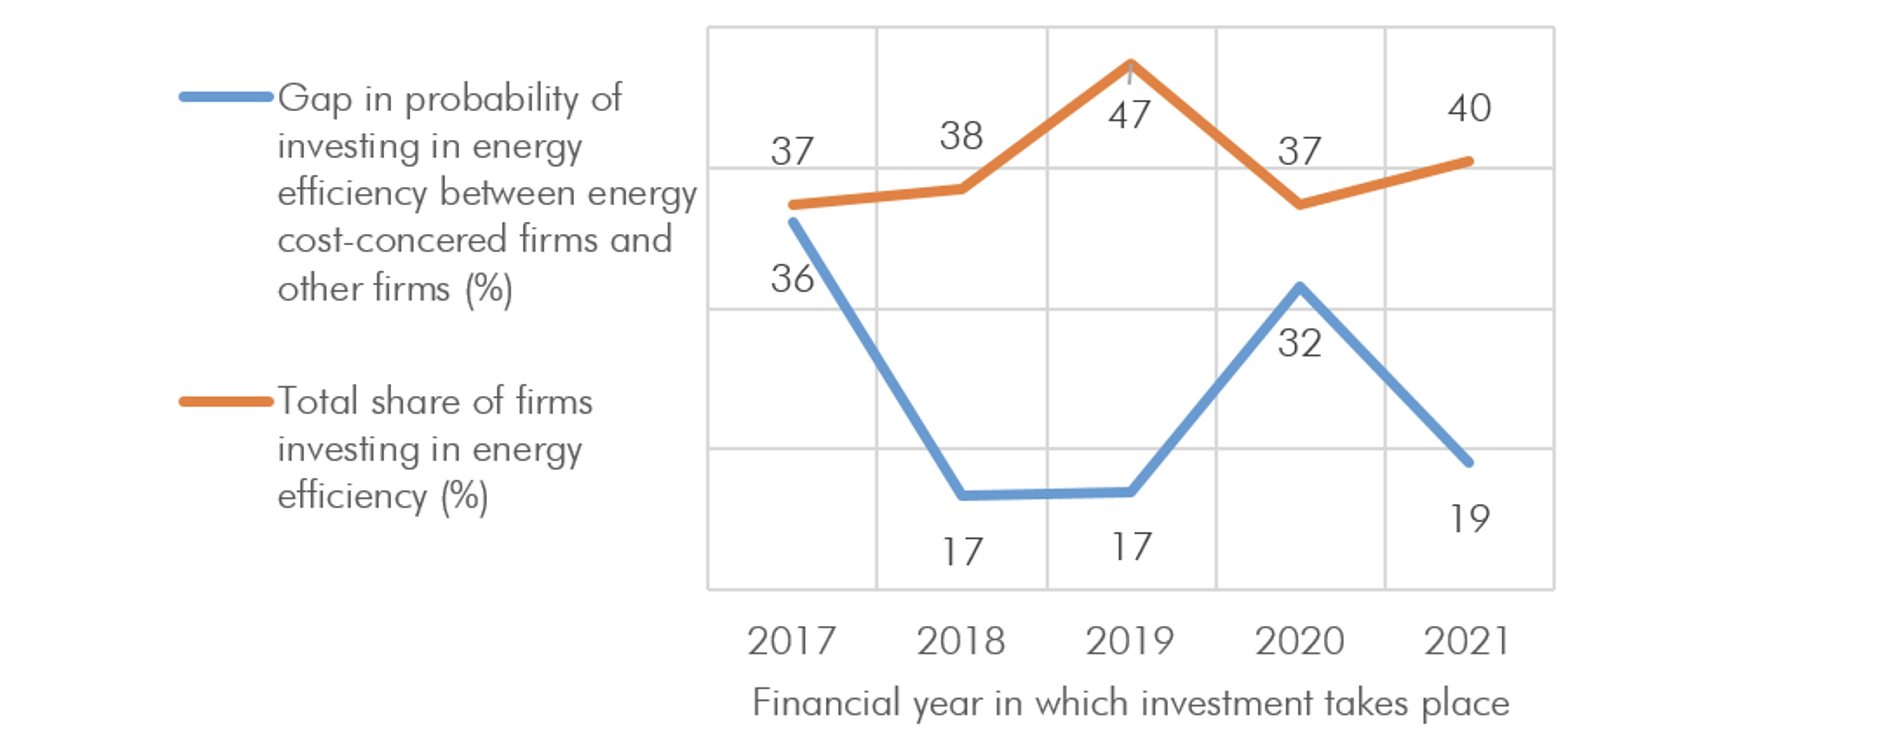 Figure 6 Energy efficiency investment and the gap in the probability of investing, conditional on firms seeing energy costs as a major obstacle